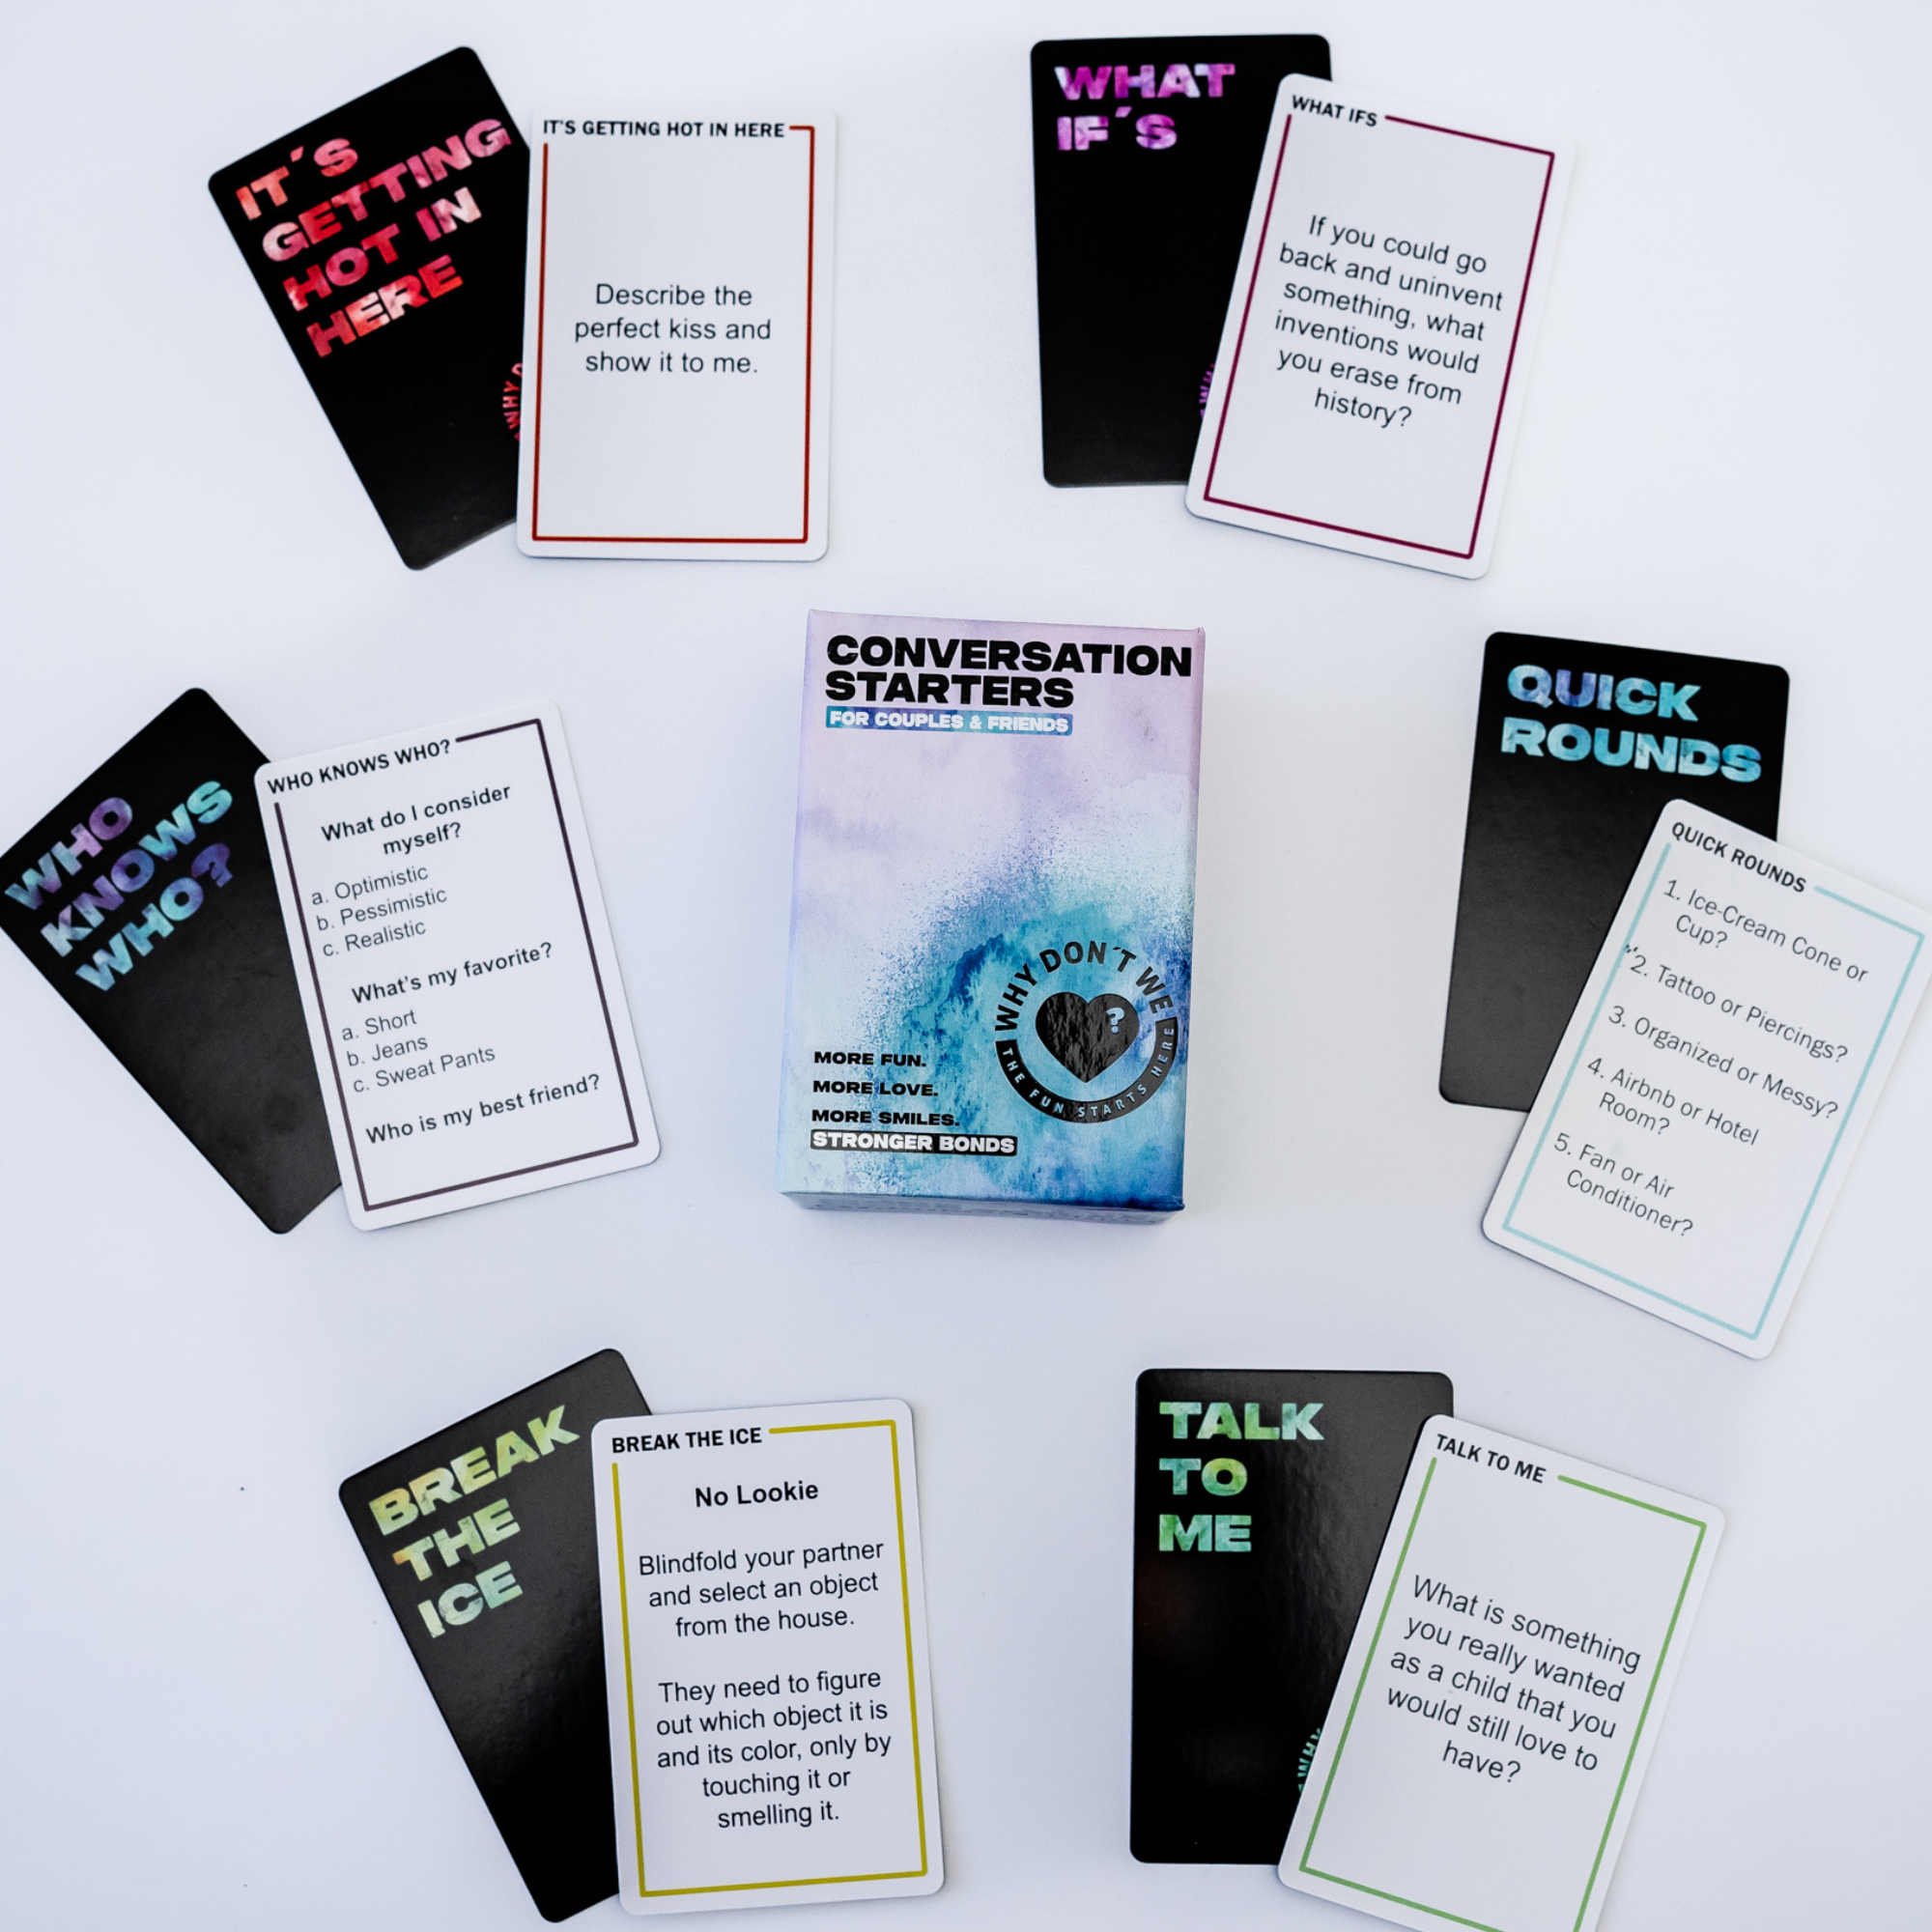 Spice IT UP by Why Don't We. Spicy Couples Games for Adults with 150 Cards  with Conversations, Spicy Dares & More - Best Date Night Games for Couples